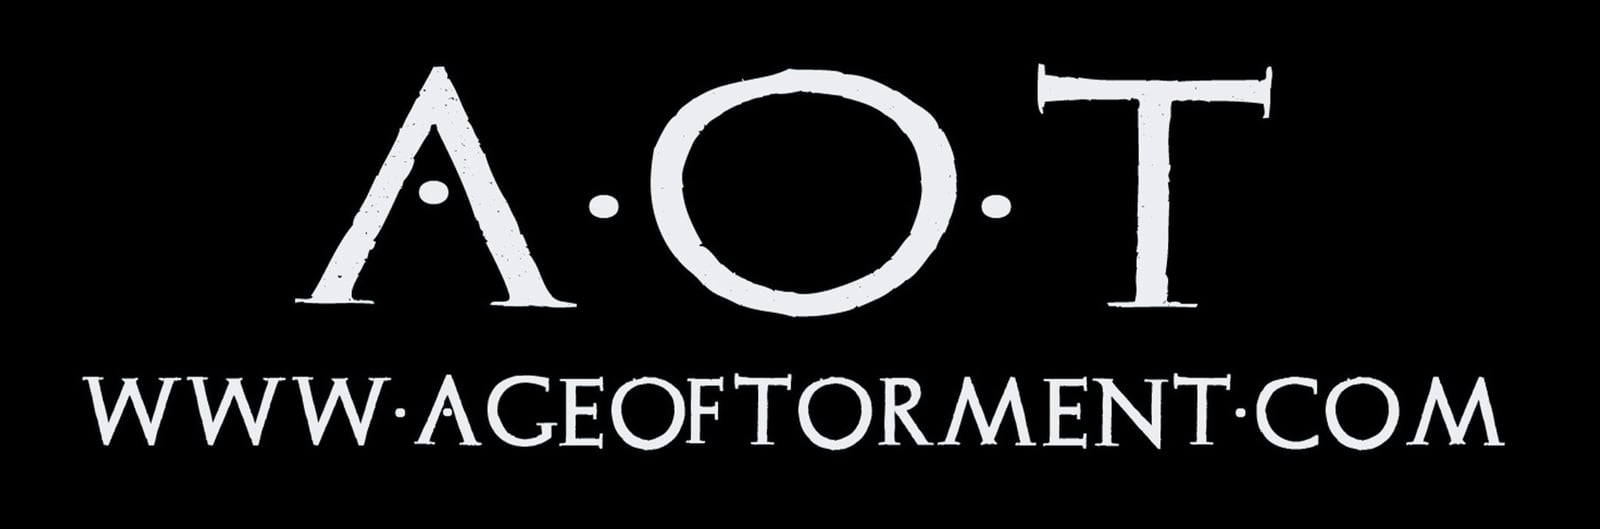 AGE OF TORMENT Webstore